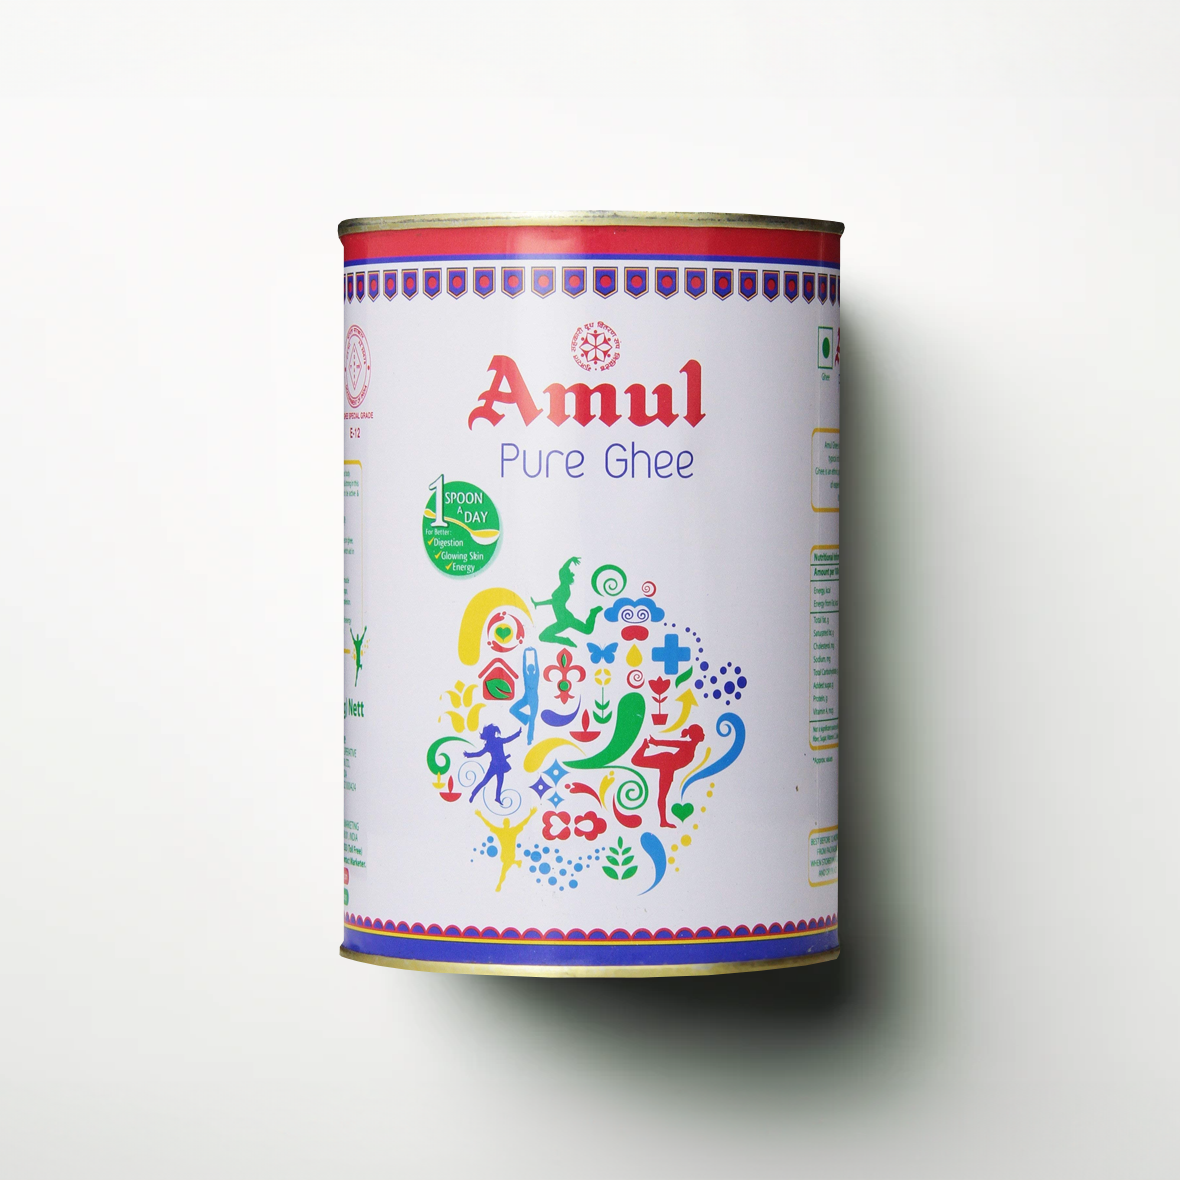 Amul Pure Ghee 1 ltr - Pure and Natural